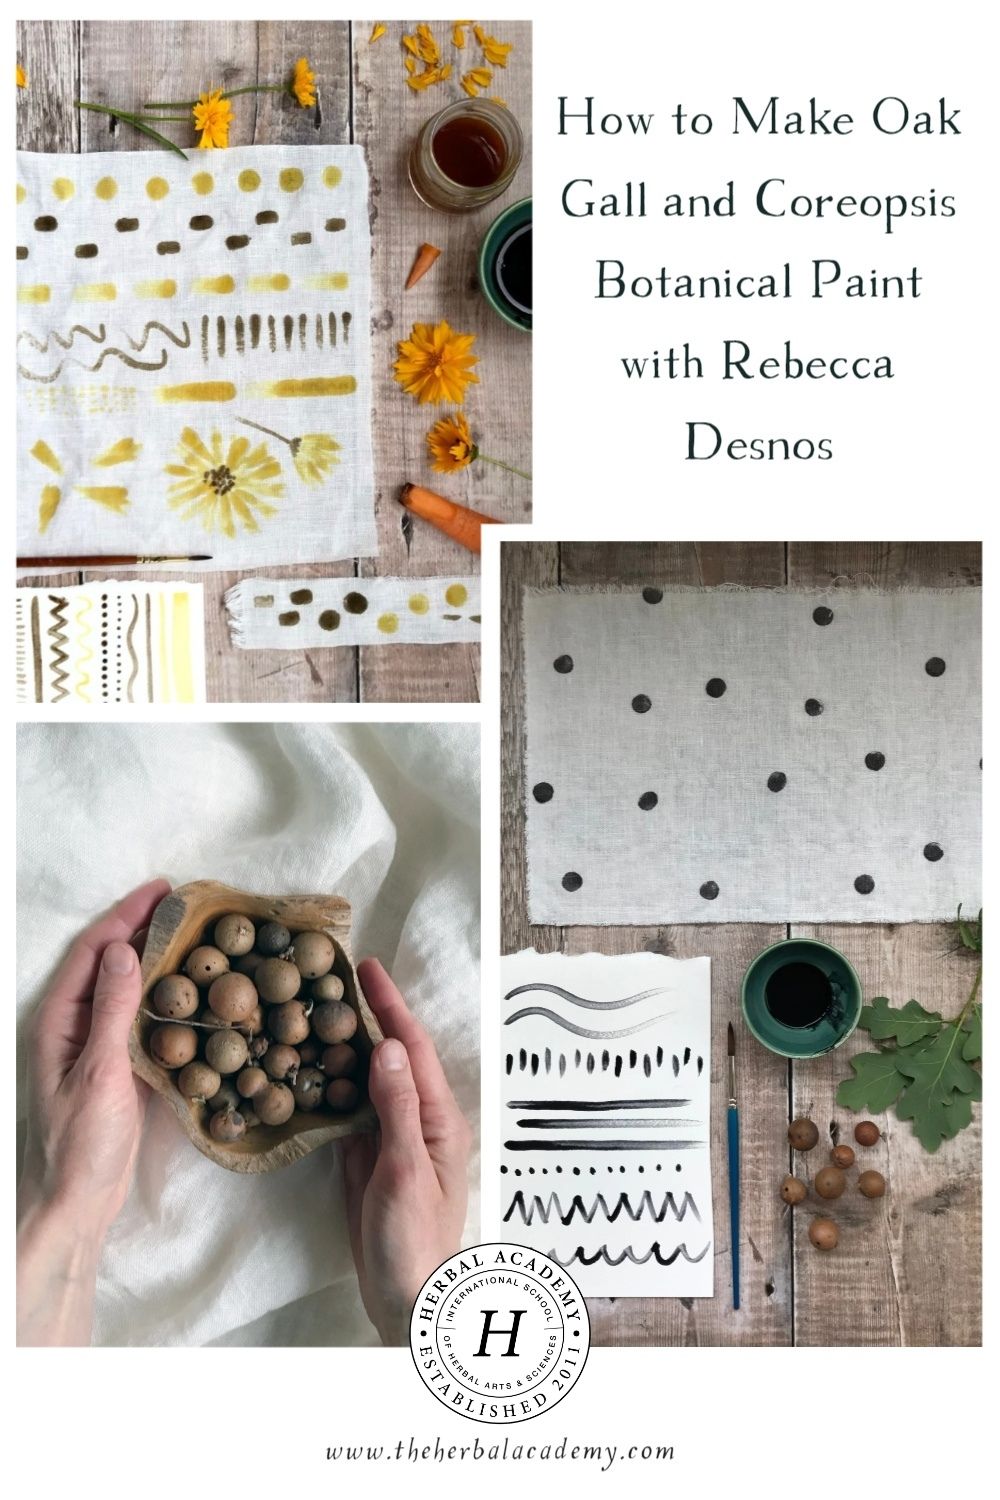 How to Make Oak Gall and Coreopsis Botanical Paint with Rebecca Desnos | Herbal Academy | Learn how to make botanical paint from oak galls and iron, and use any dye plant, like coreopsis flowers, as well.